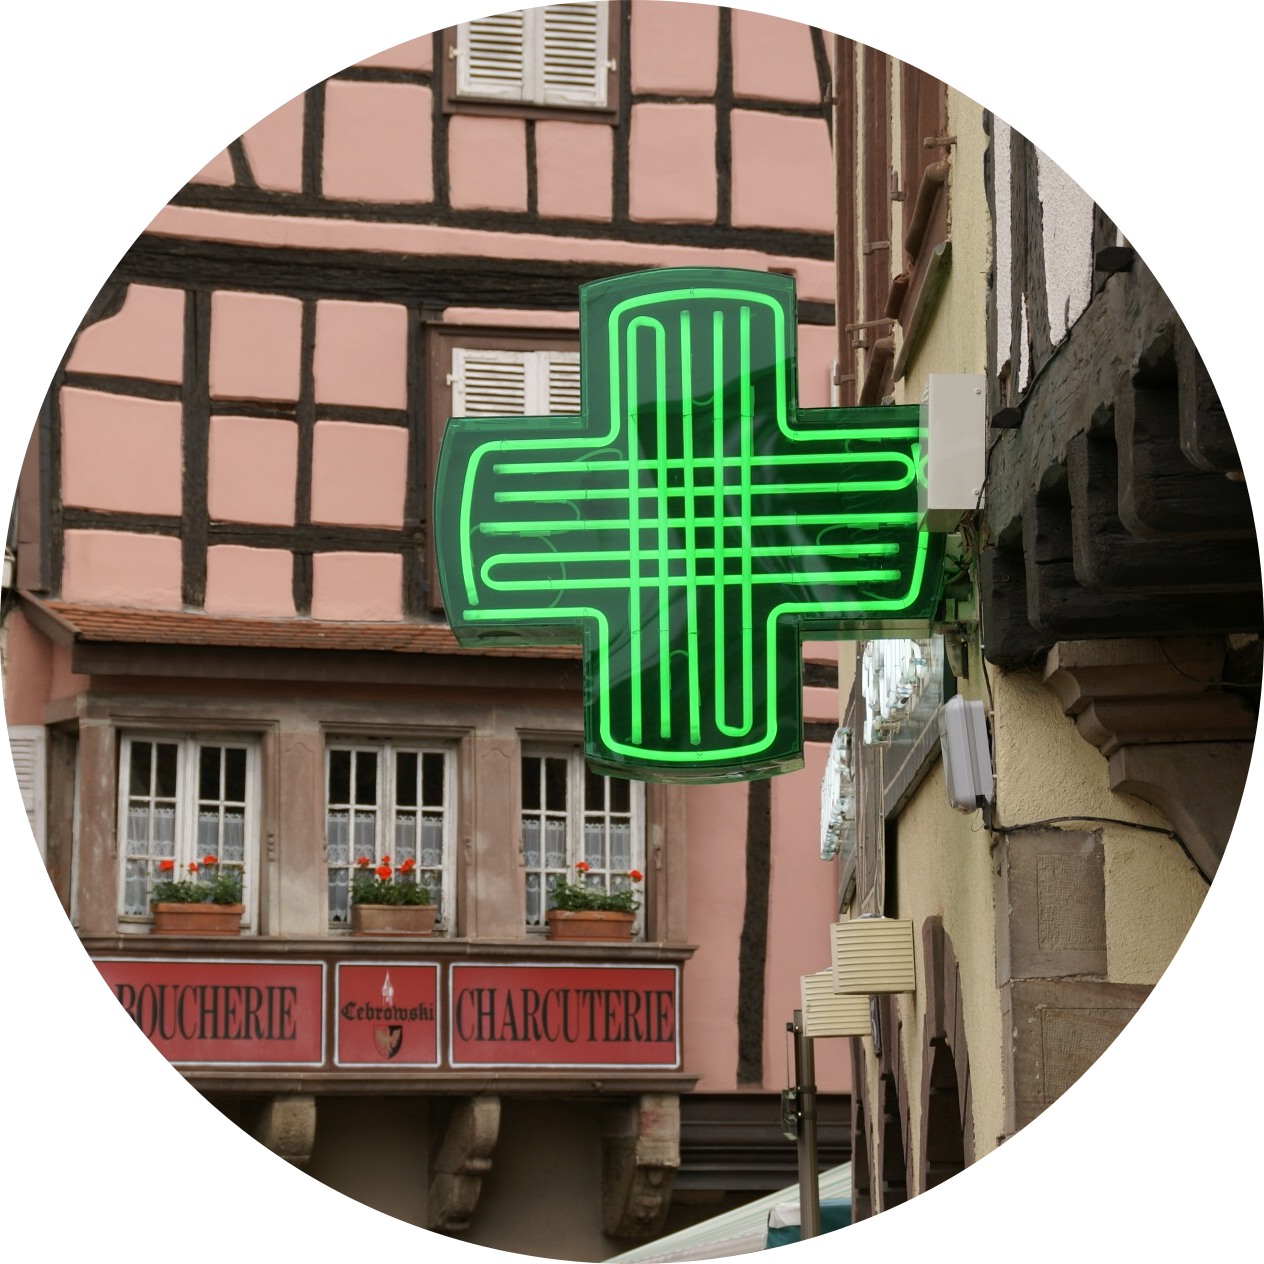 MyFrenchLife™ – MyFrenchLife.org – French pharmacy – French pharmacies – products – cult – best in the world – why are French pharmacies – England – green plus sign